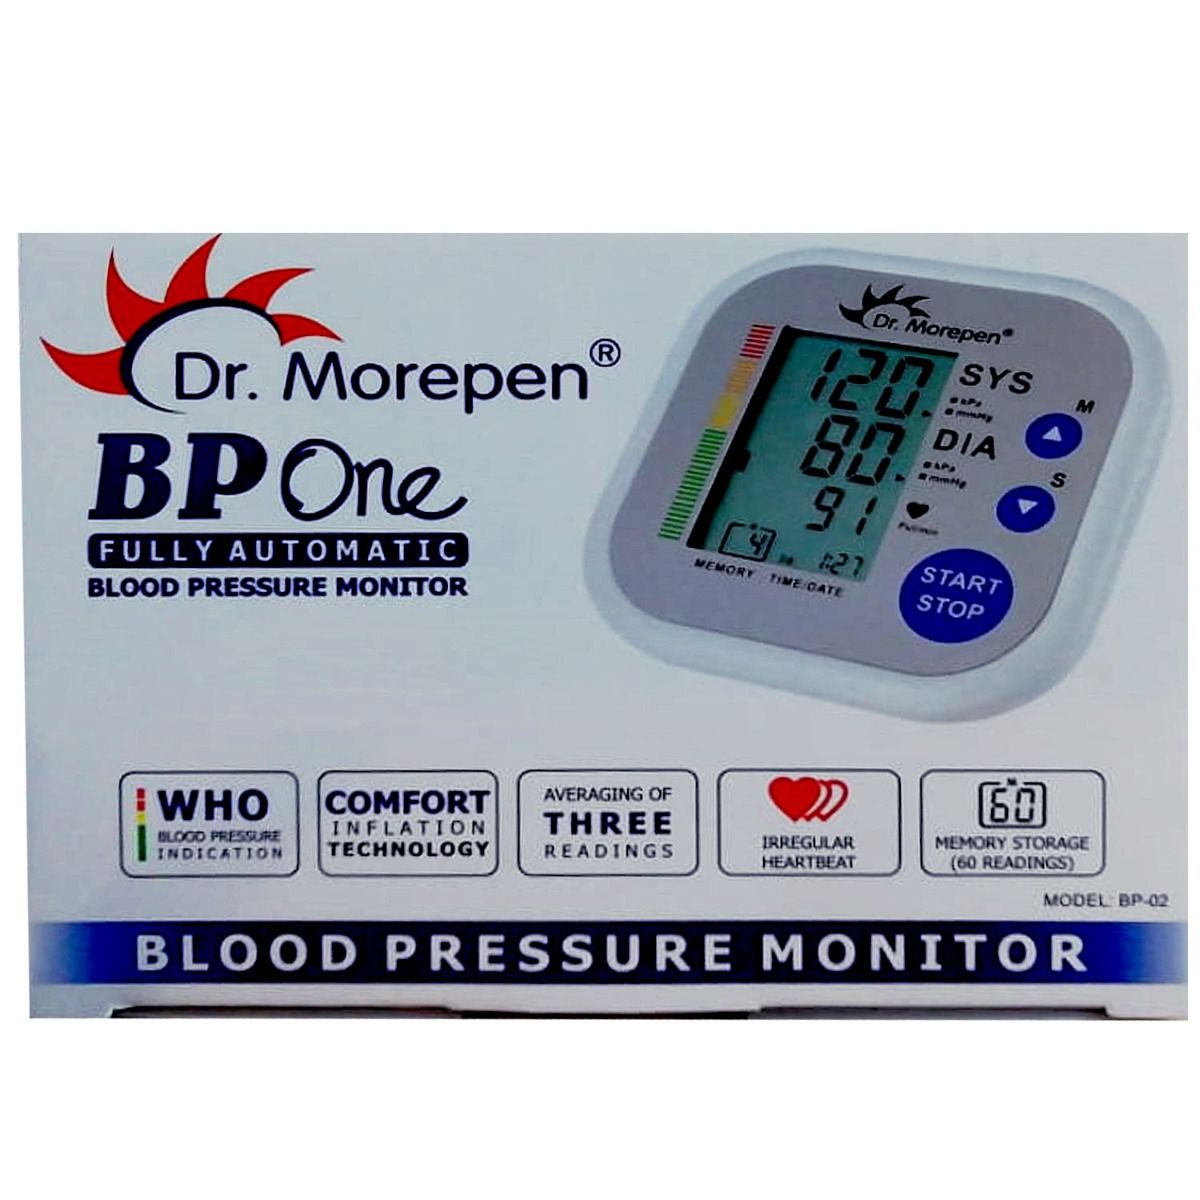 Dr. Morepen BP One Fully Automatic Blood Pressure Monitor BP-02, 1 Count, Pack of 1 